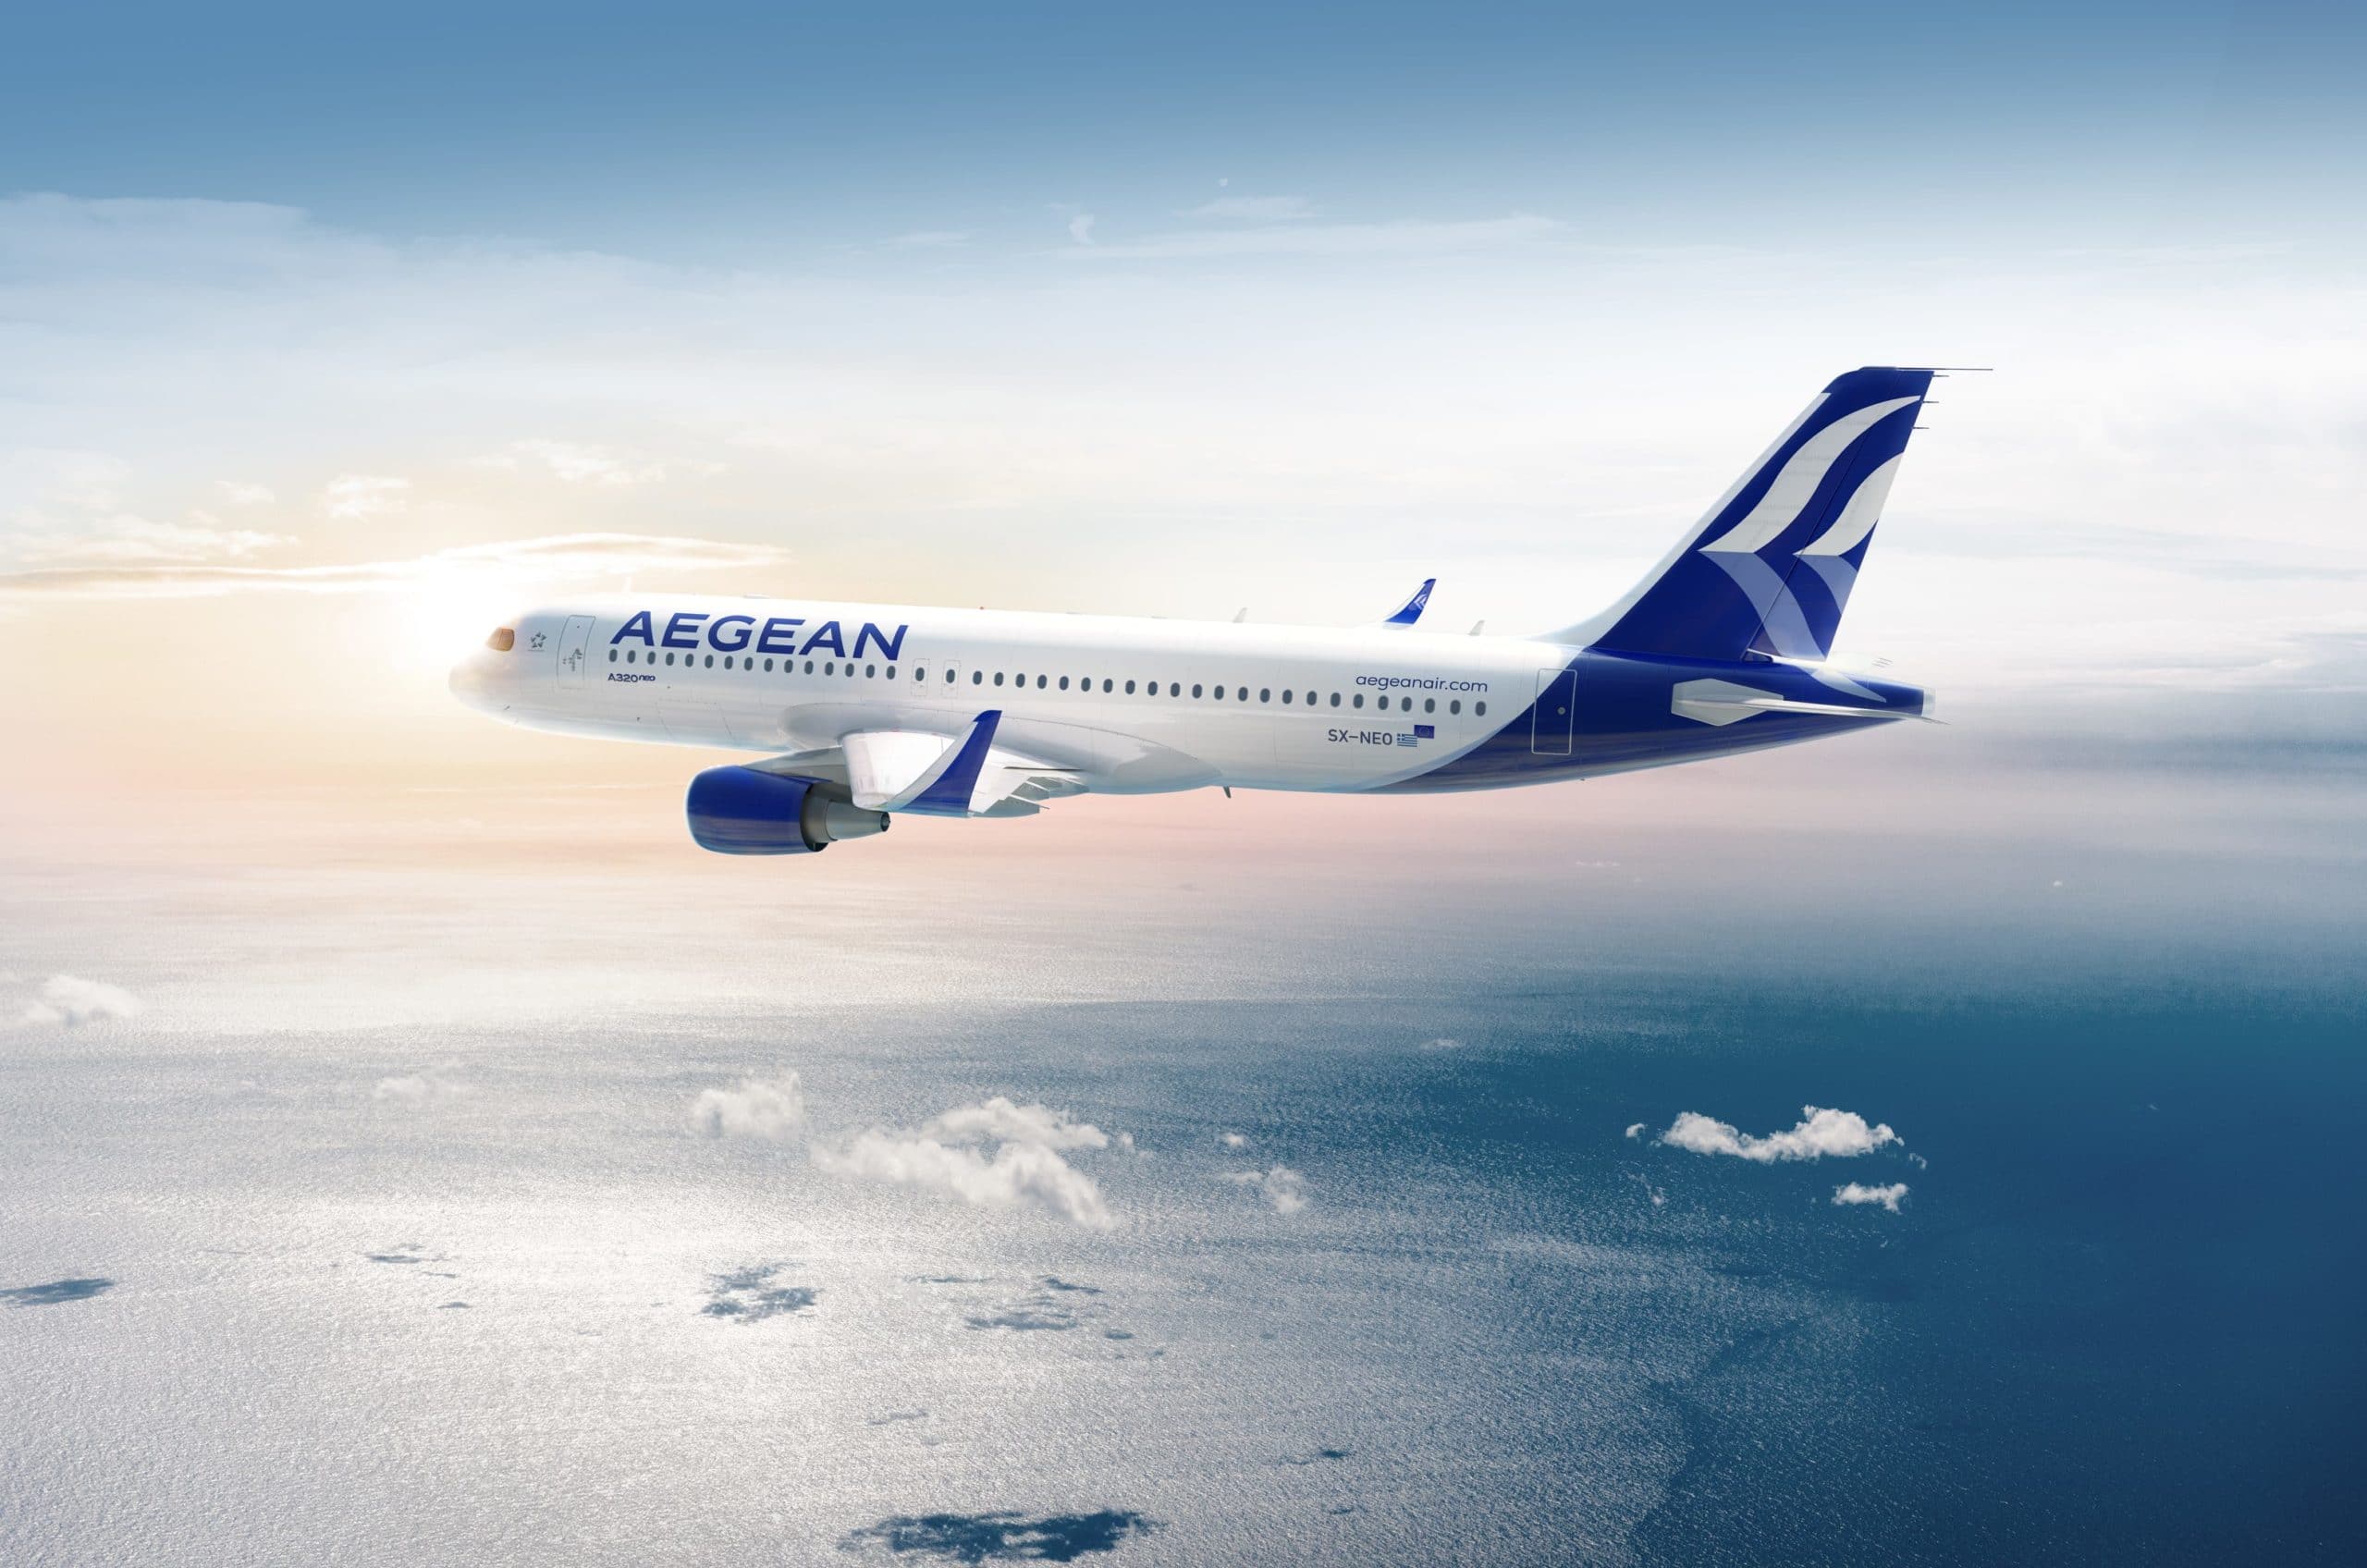 Aegean Airlines' new livery, created by PriestmanGoode.